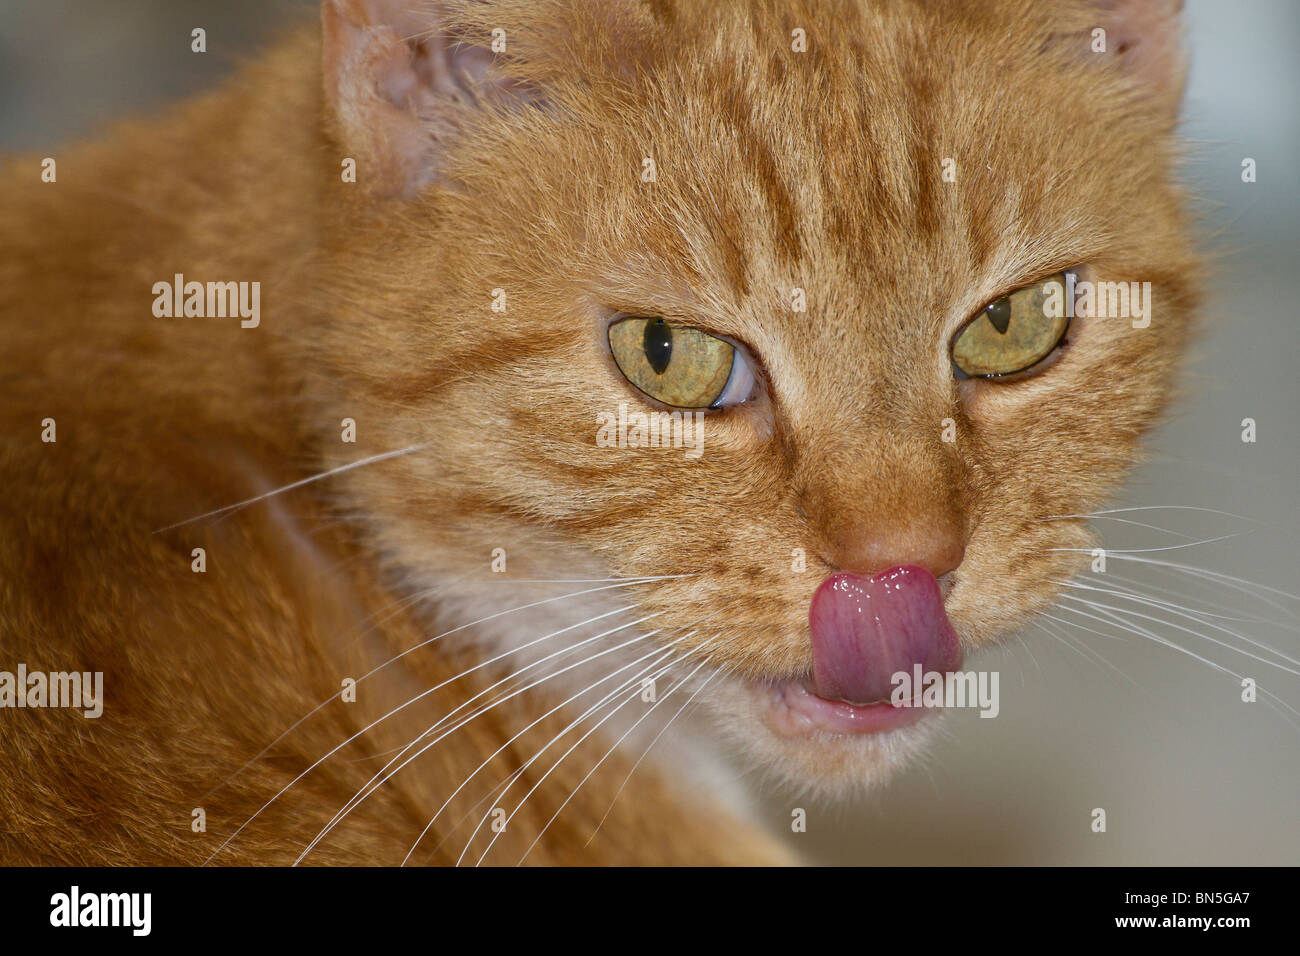 A single adult female Ginger cat (Felis catus) licking her lips and touching her nose with her tongue Stock Photo